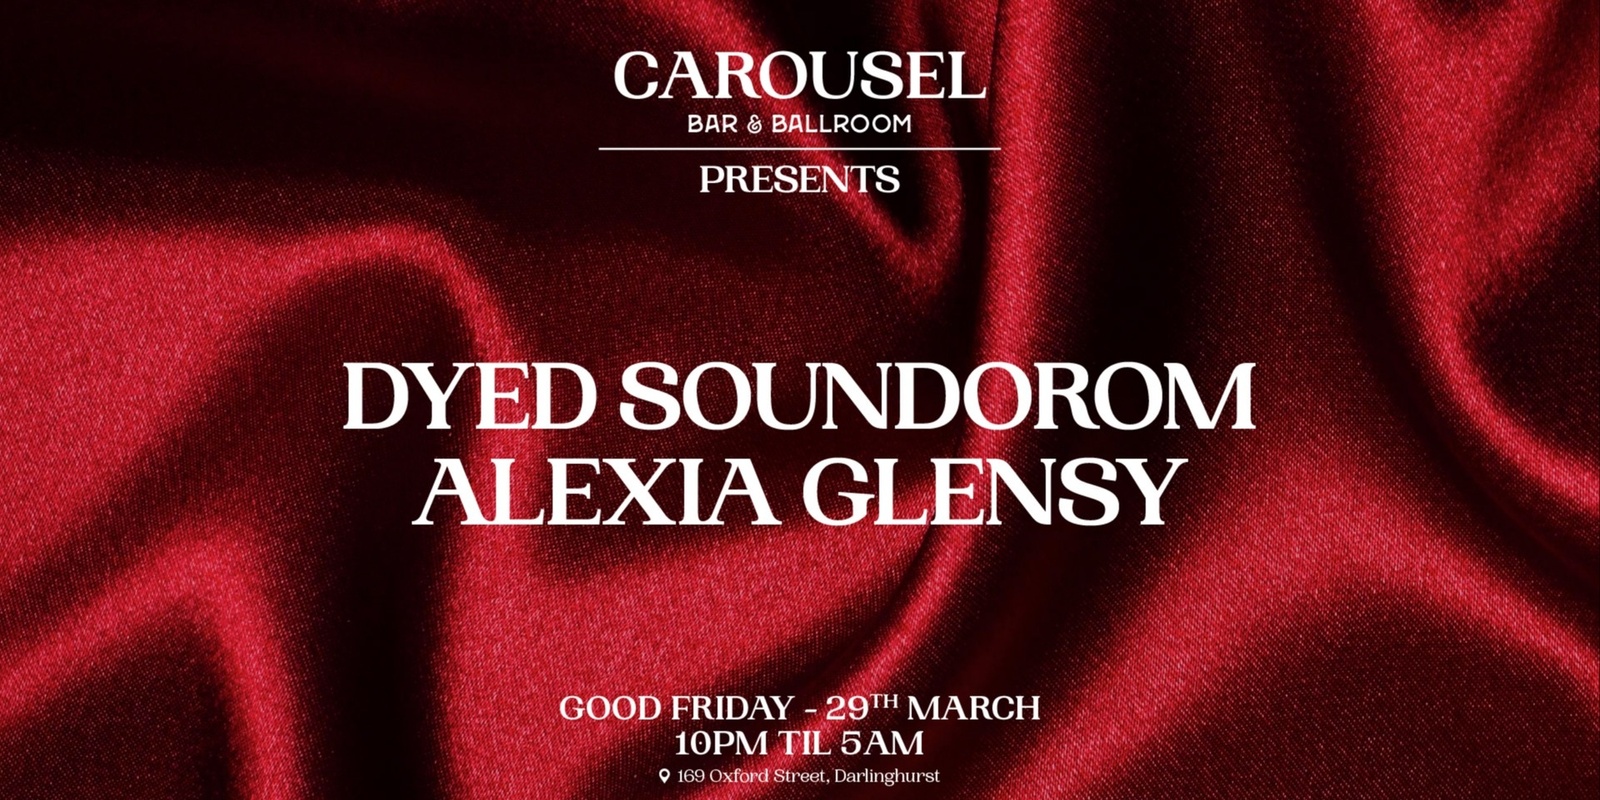 Banner image for Carousel Presents - Dyed Soundorom & Alexia Glensy - Good Friday 29th March